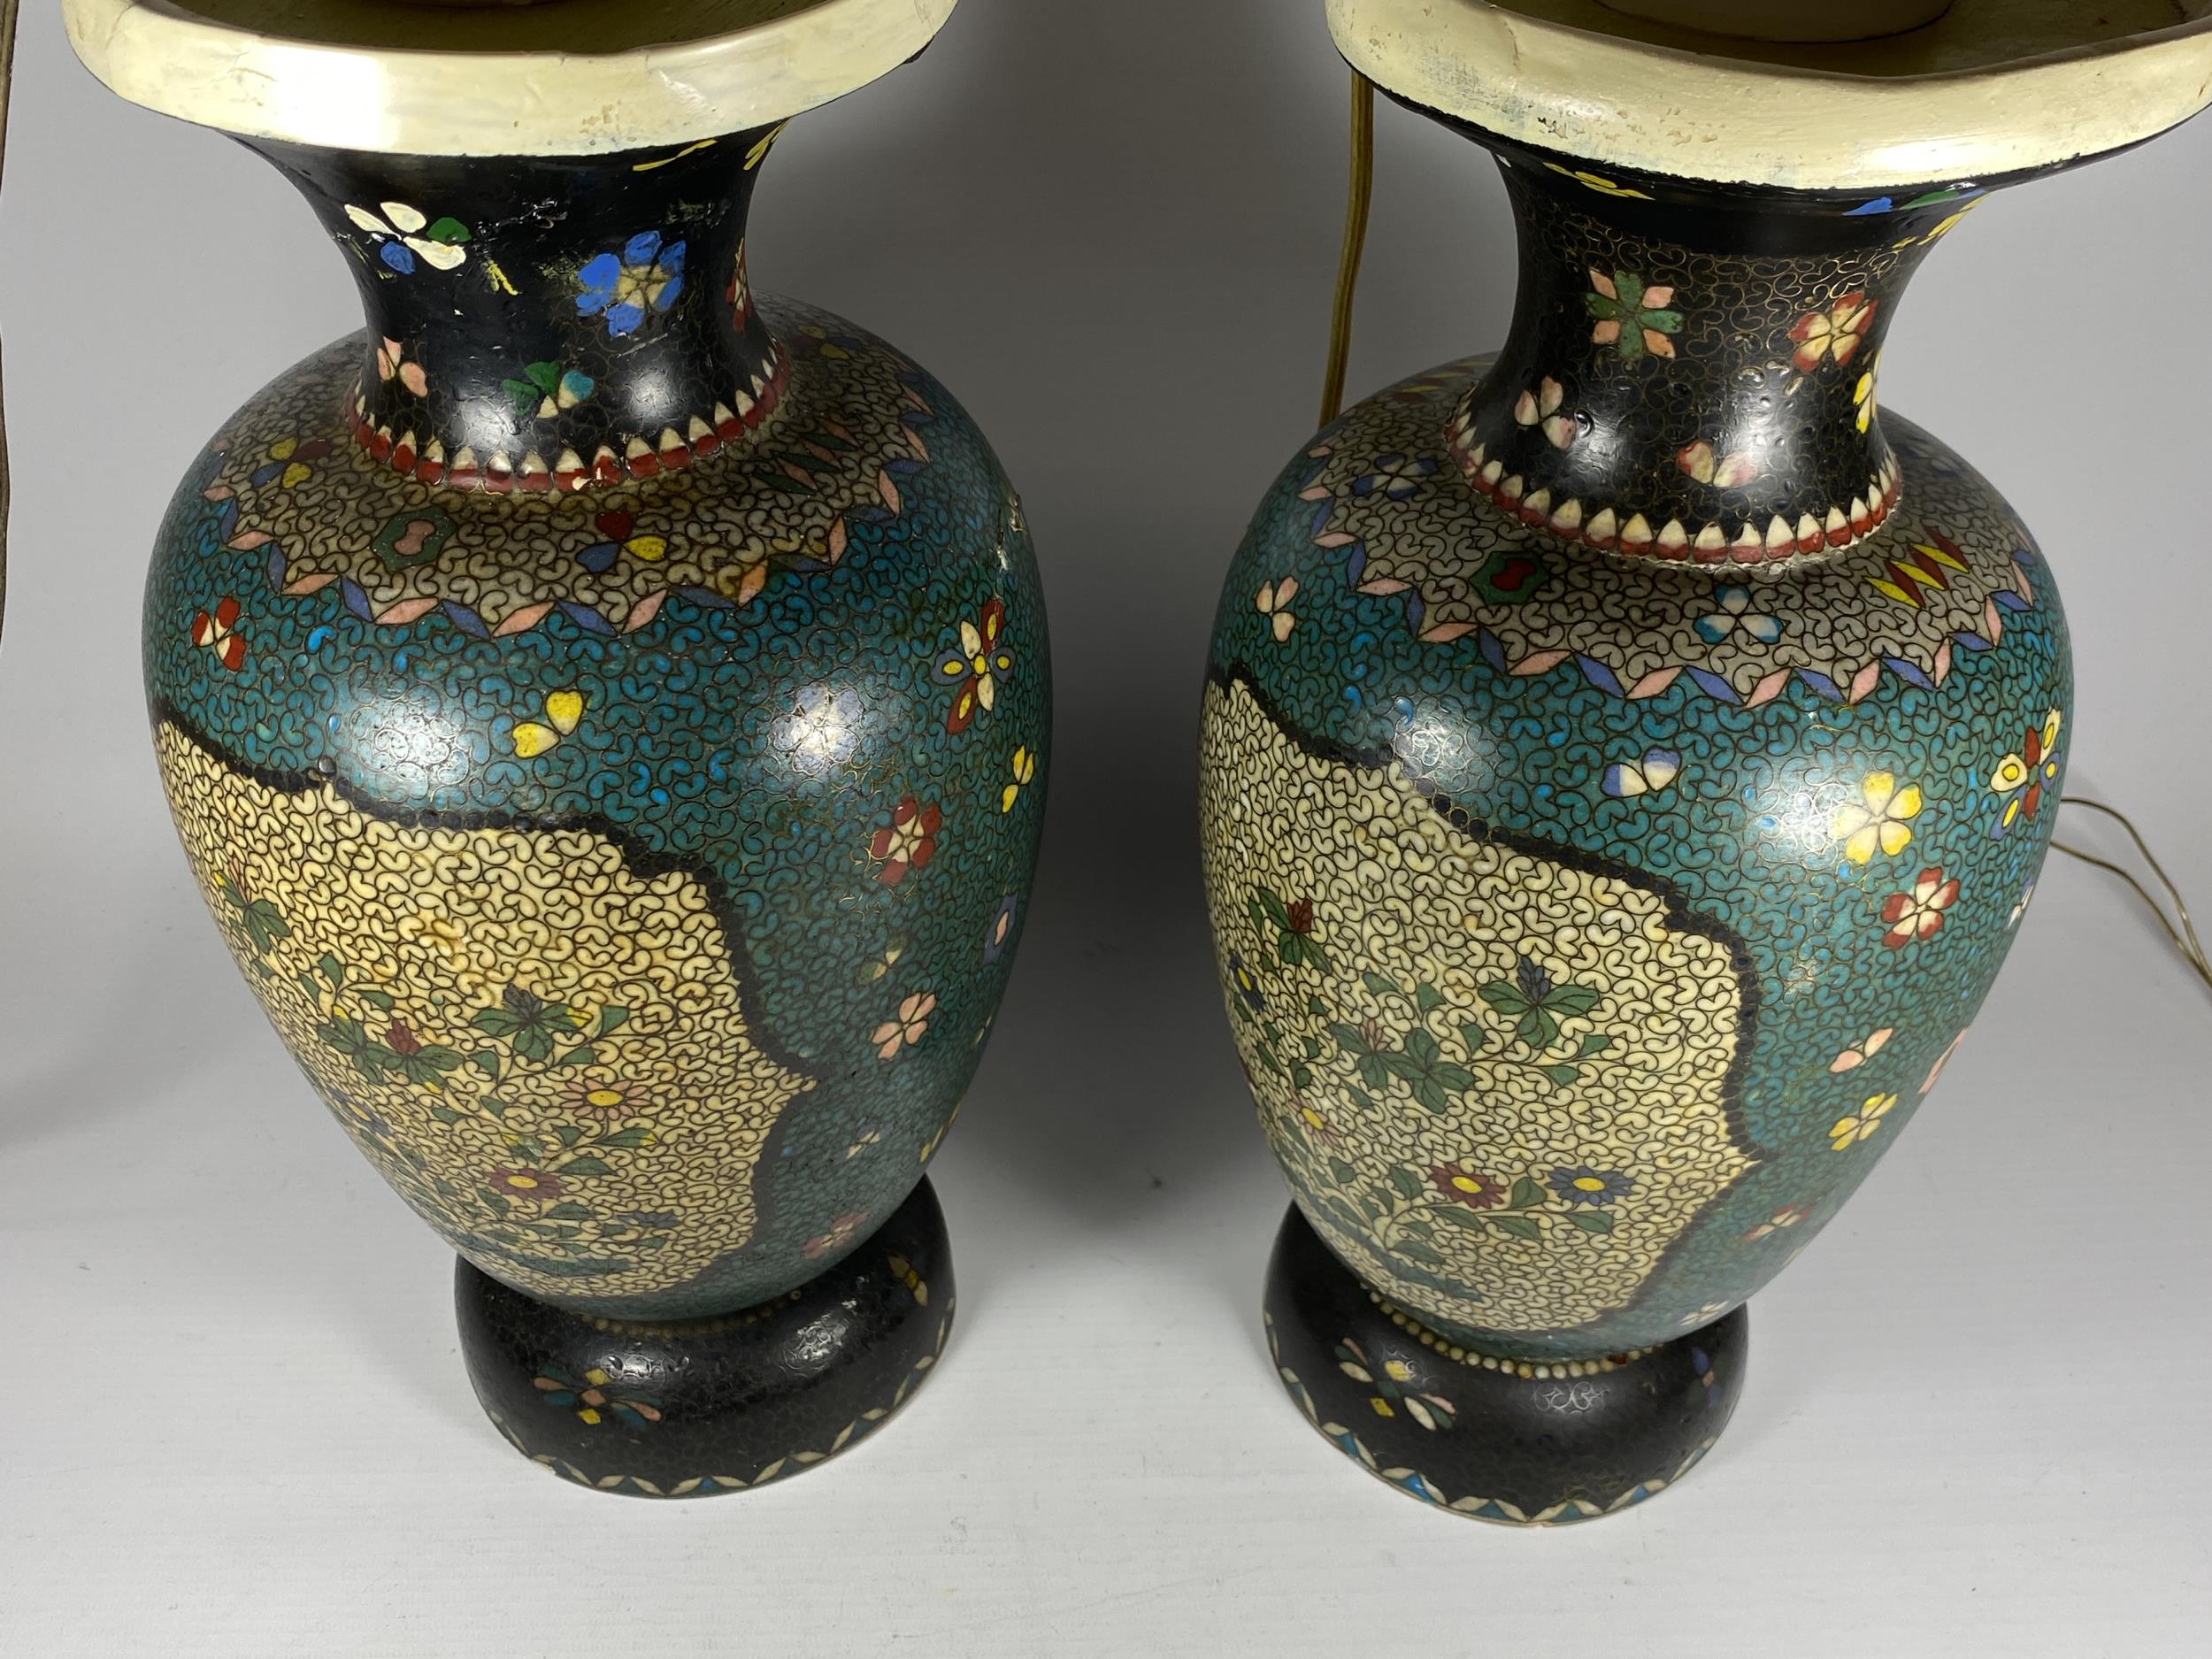 A PAIR OF JAPANESE MEIJI PERIOD (1868-1912) SATSUMA POTTERY CONVERTED LAMP BASES IN THE CLOISONNE - Image 4 of 6